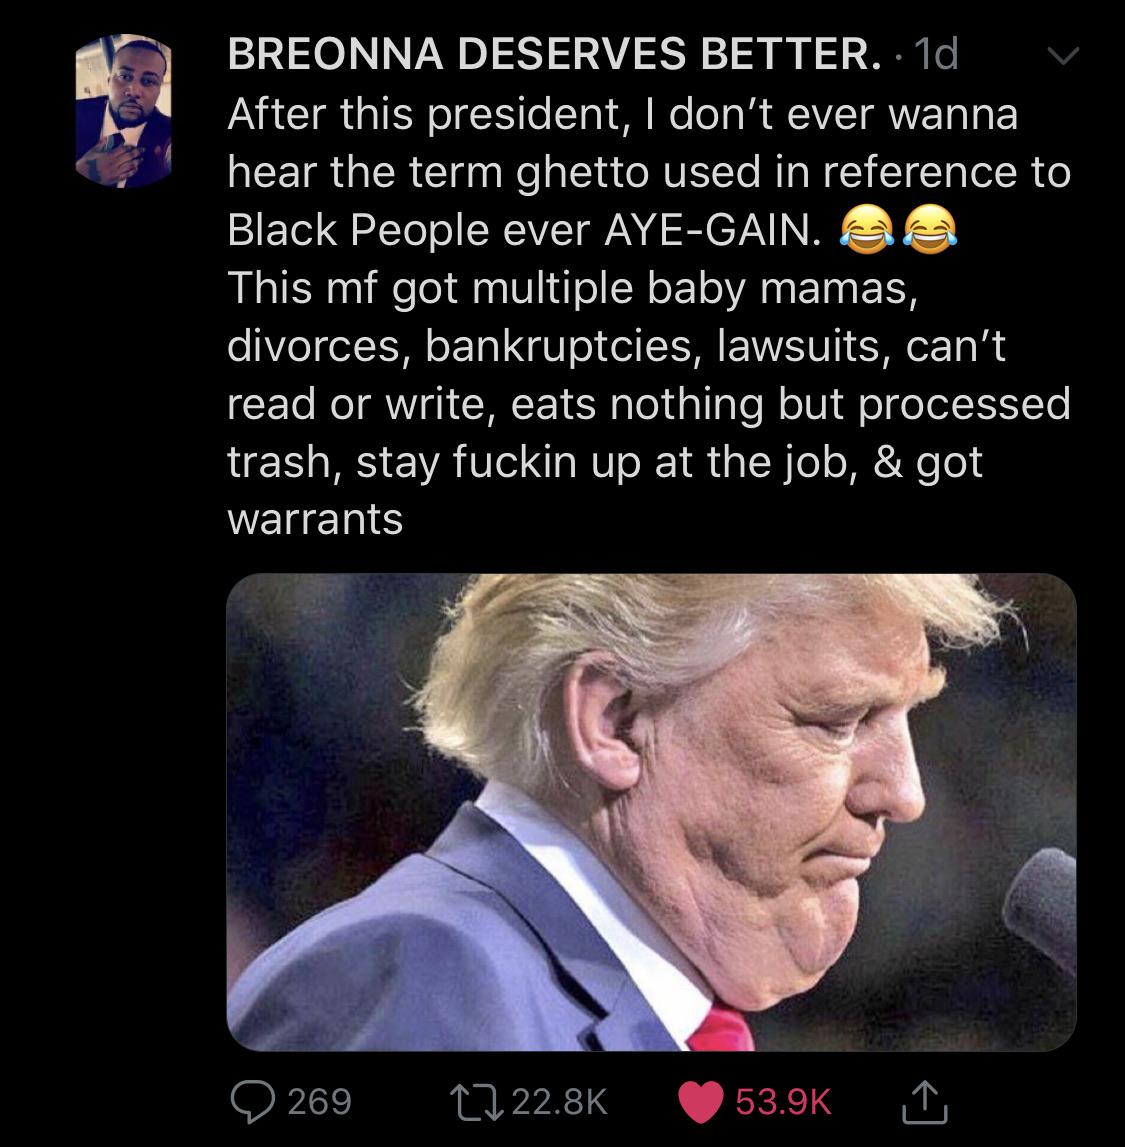 Tweets, Obama, DJT, White House, America Black Twitter Memes Tweets, Obama, DJT, White House, America text: BREONNA DESERVES BETTER. After this president, I don't ever wanna hear the term ghetto used in reference to Black People ever AYE-GAIN. This mf got multiple baby mamas, divorces, bankruptcies, lawsuits, can't read or write, eats nothing but processed trash, stay fuckin up at the job, & got warrants 0 269 to 22.8K 0 53.9K 